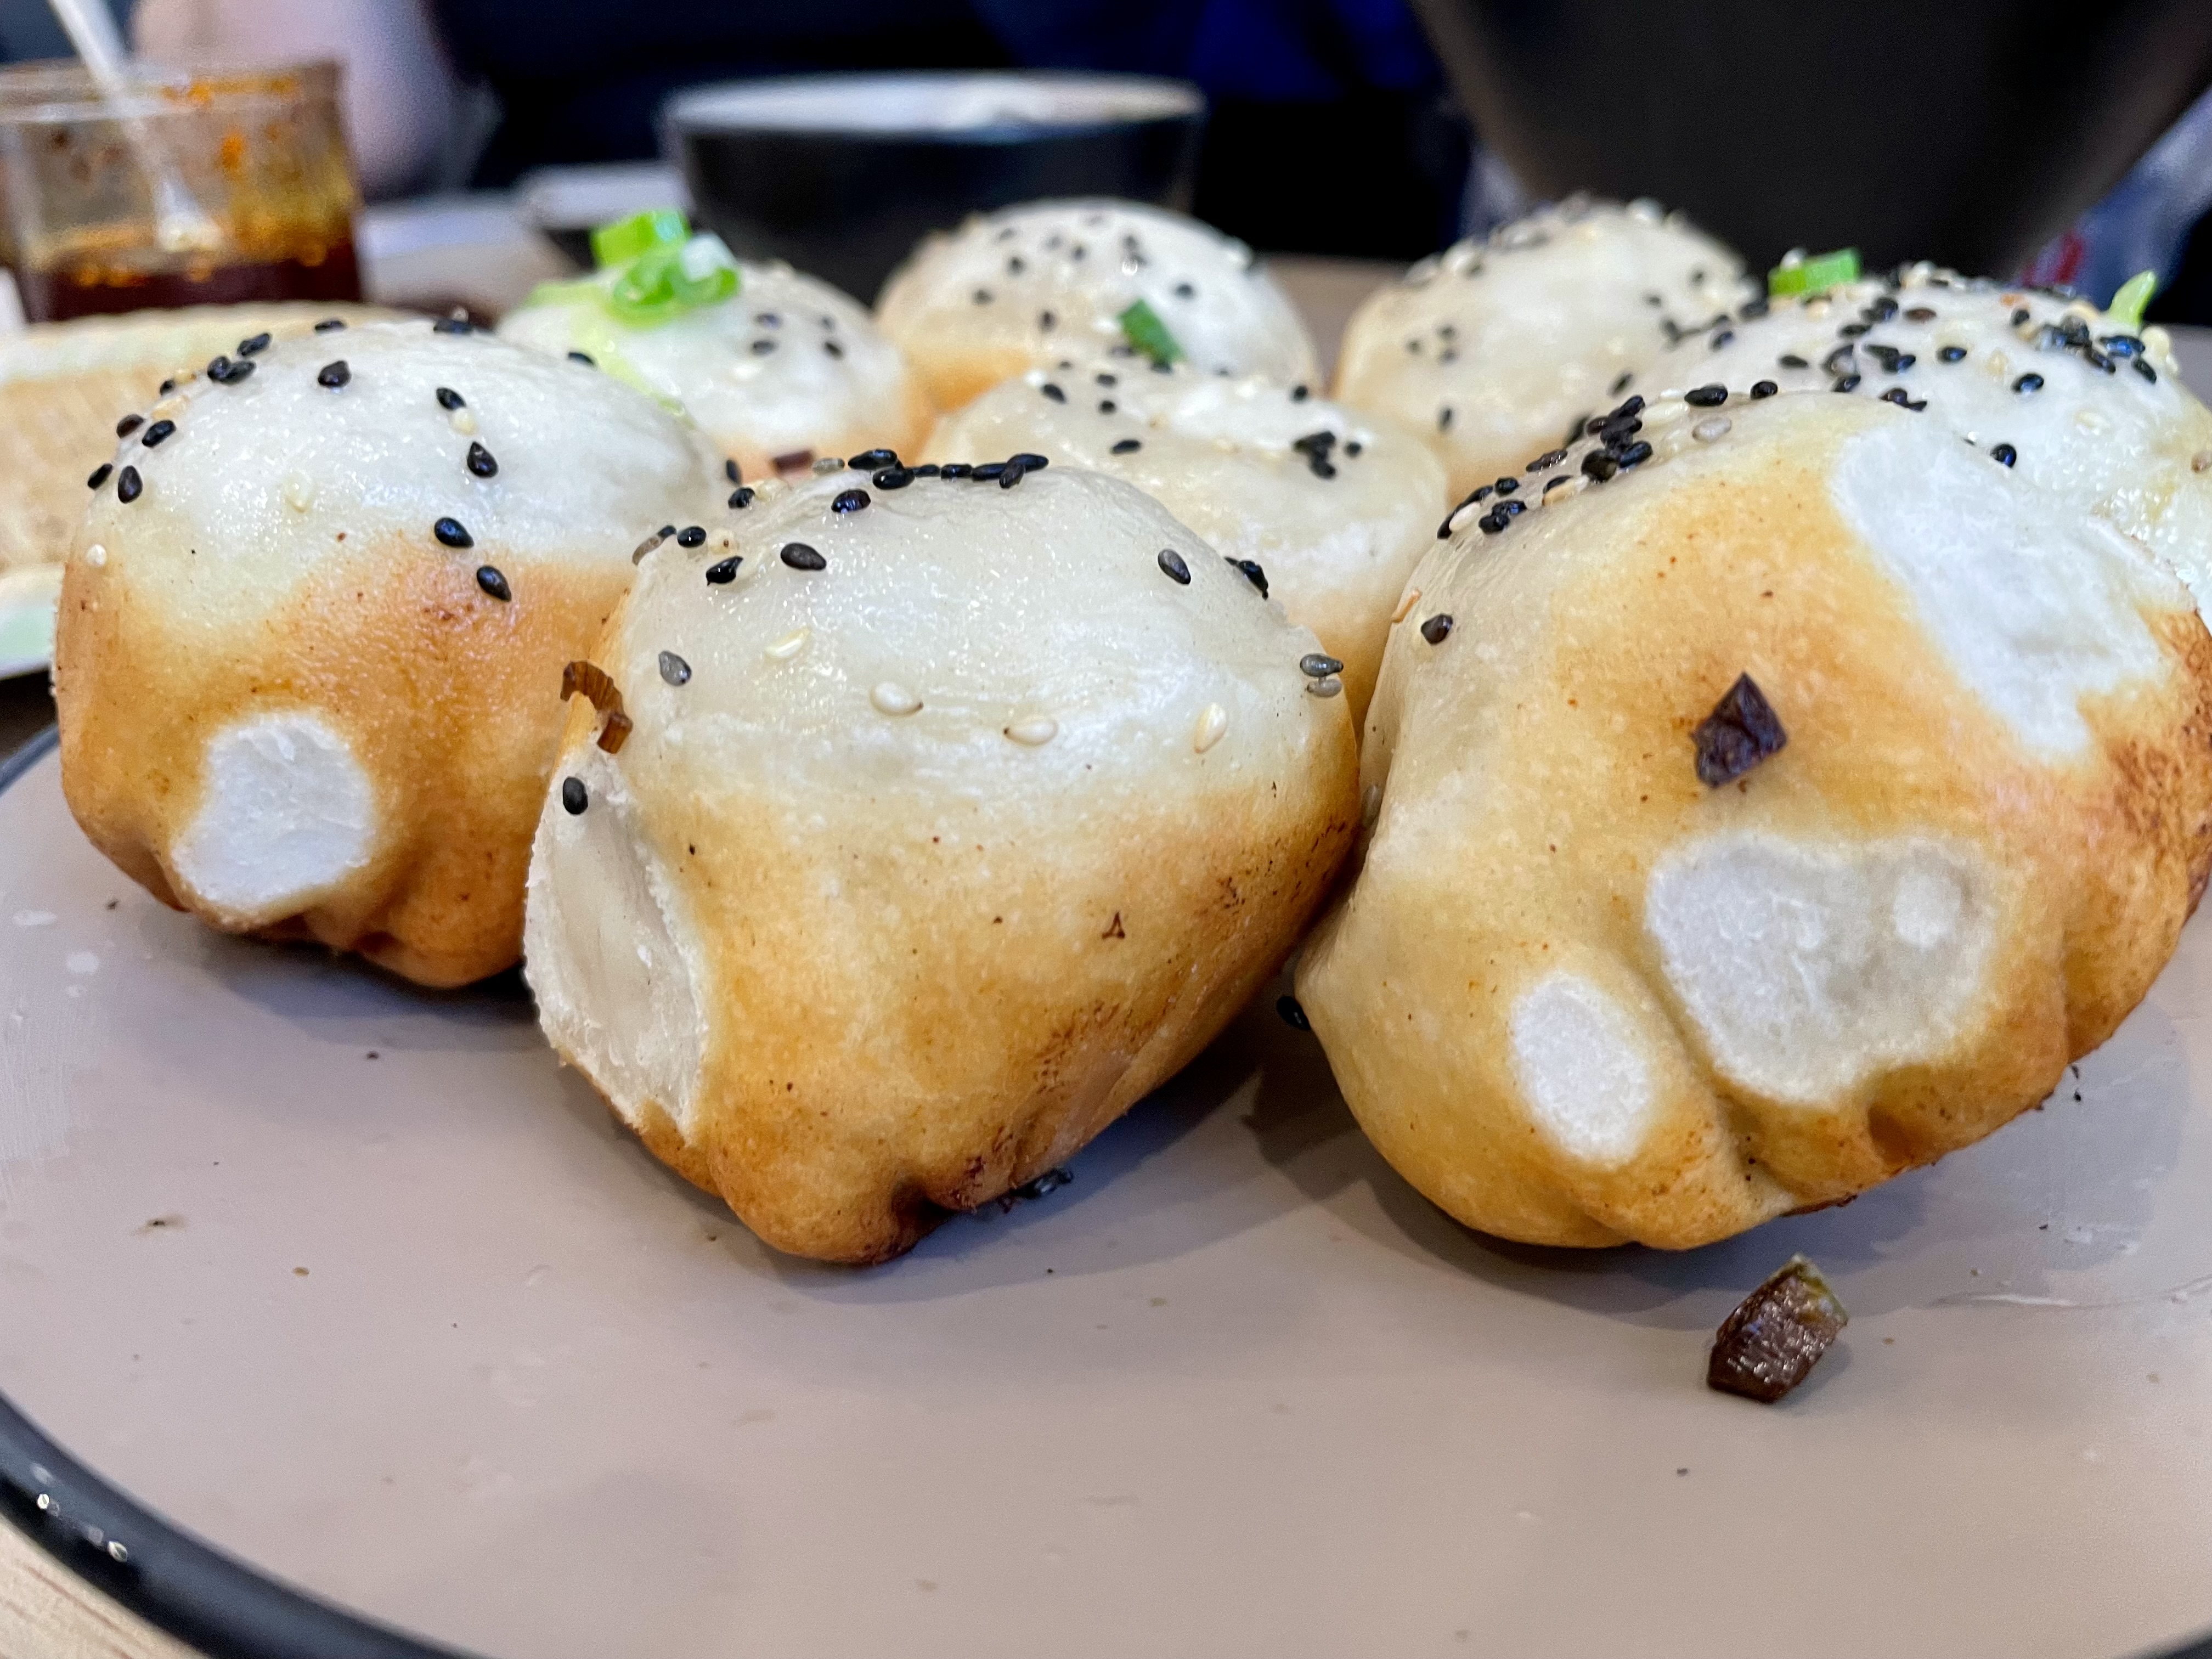 With an average rating of 4.7 out of five on Google at the time of publishing, with many raving about the pan fried buns, it was a no-brainer for us to order the doughy delights